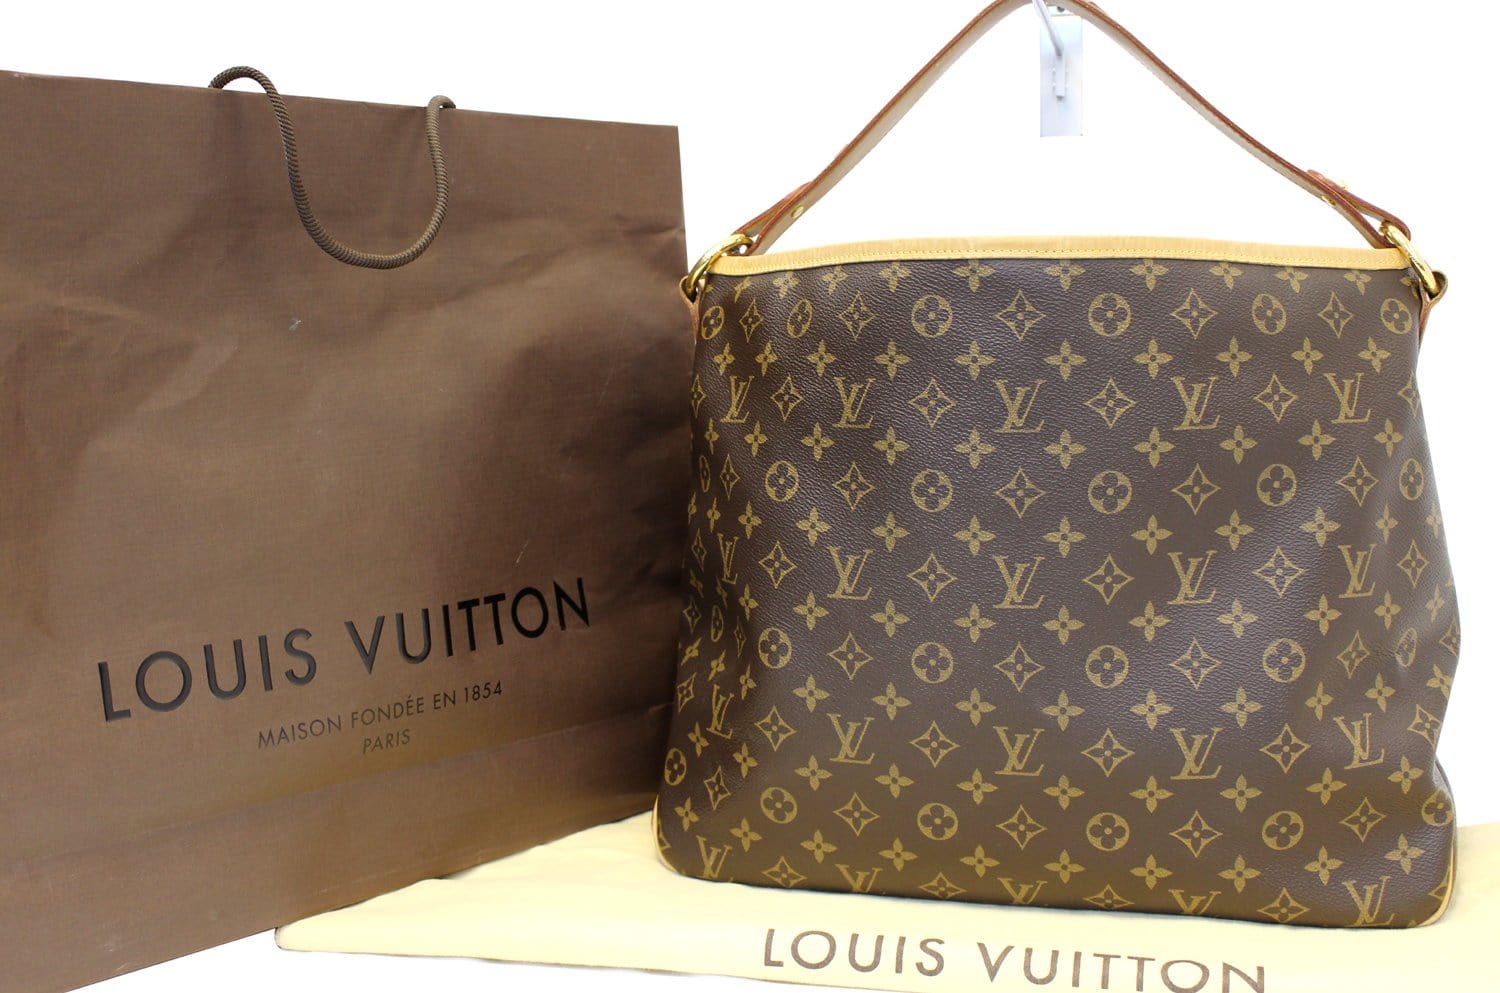 LOUIS VUITTON Authentic Paper Gift Shopping Bag LARGE SIZE 16” x13